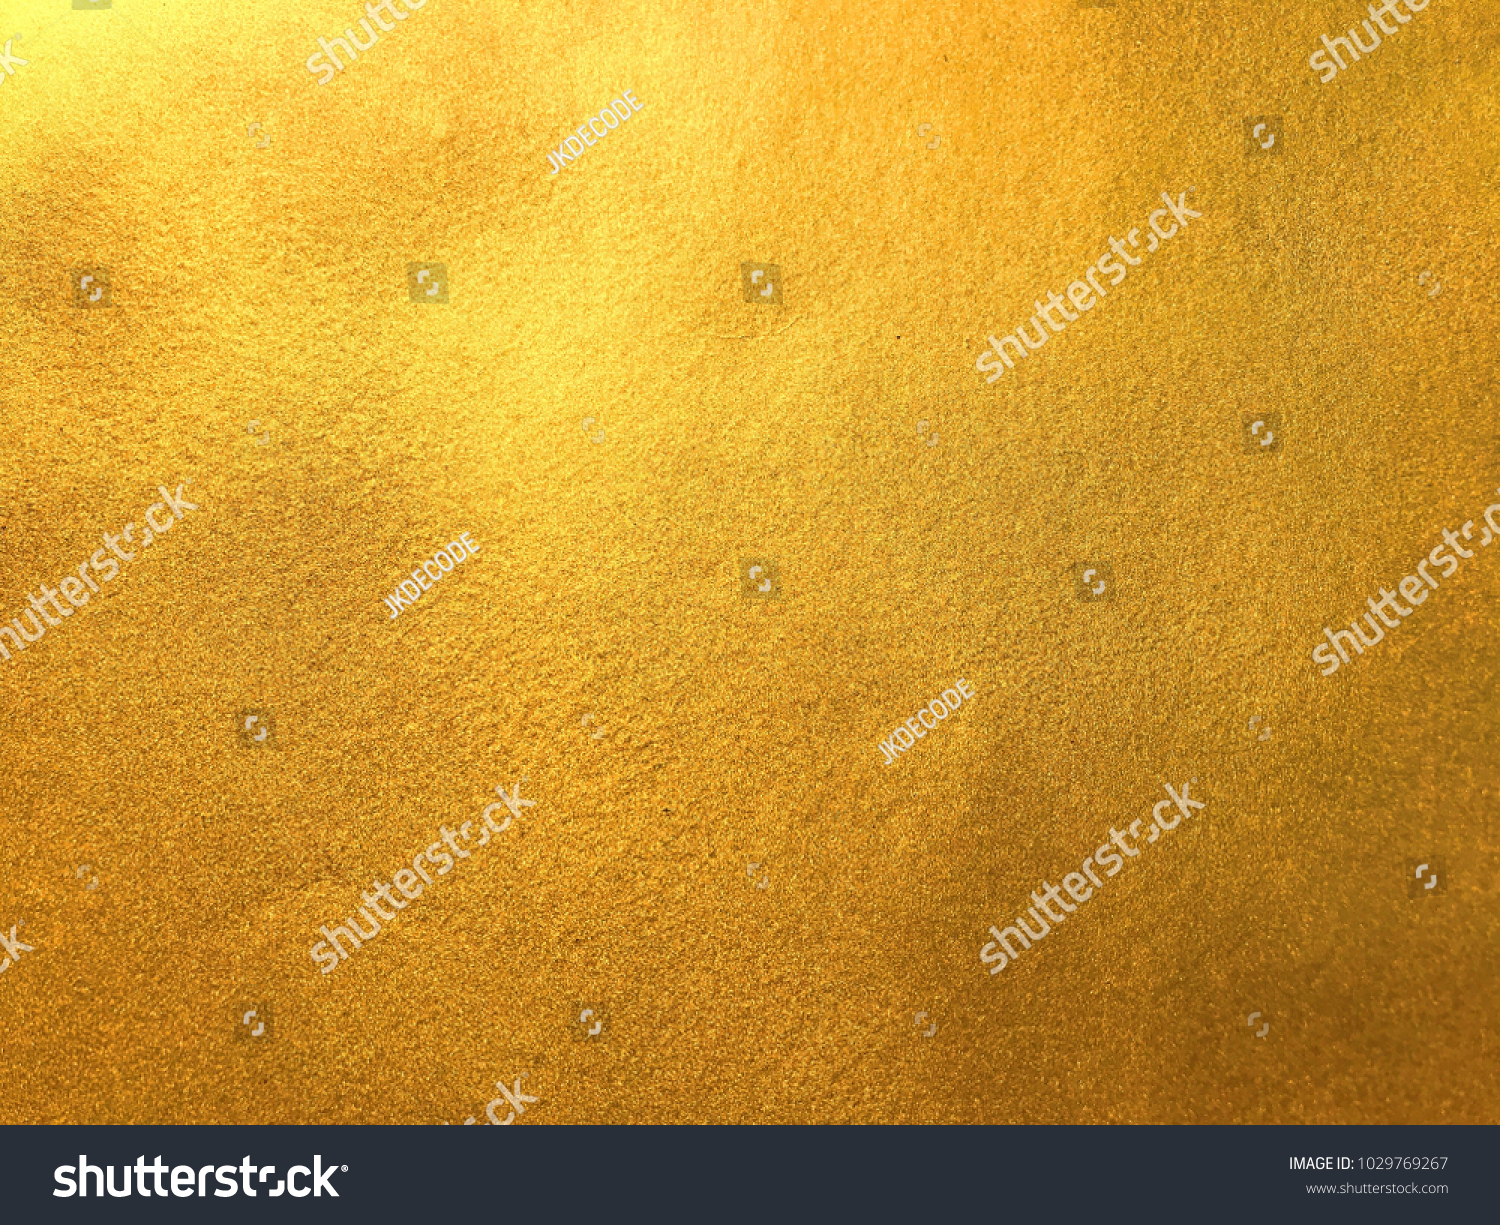 Gold or foil background texture #1029769267